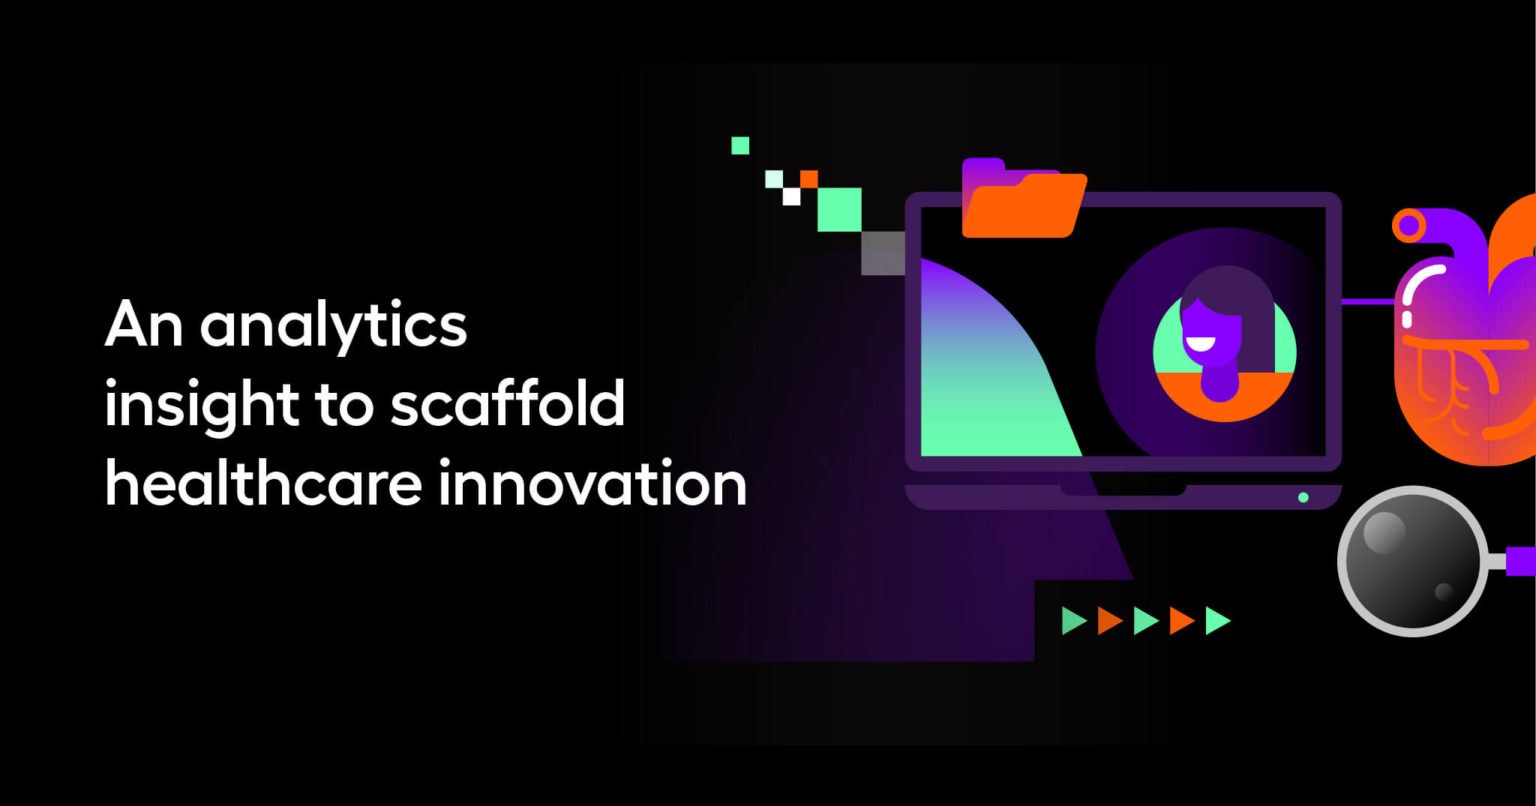 An analytics insight to scaffold healthcare innovation